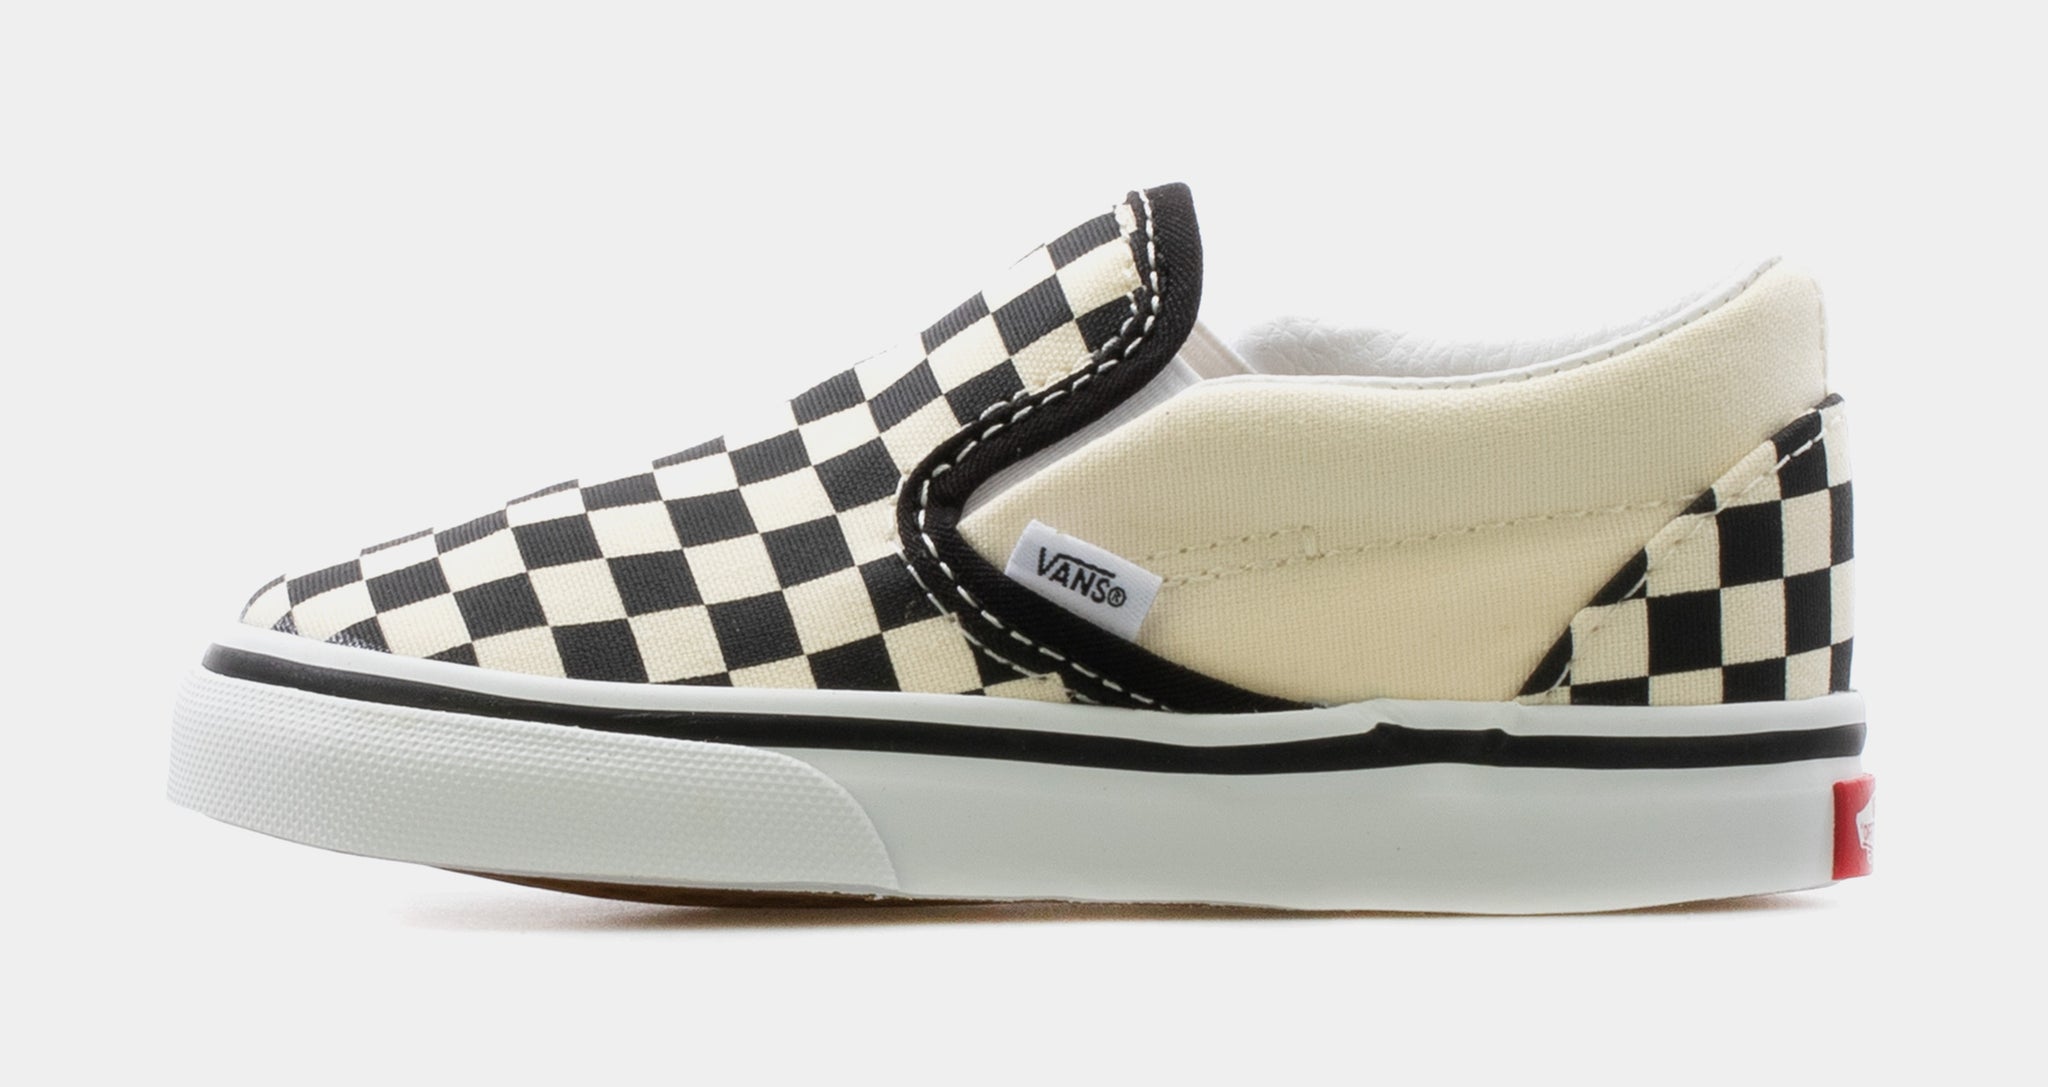 Vans Classic Slip On Checkerboard Infant Toddler Lifestyle Shoes